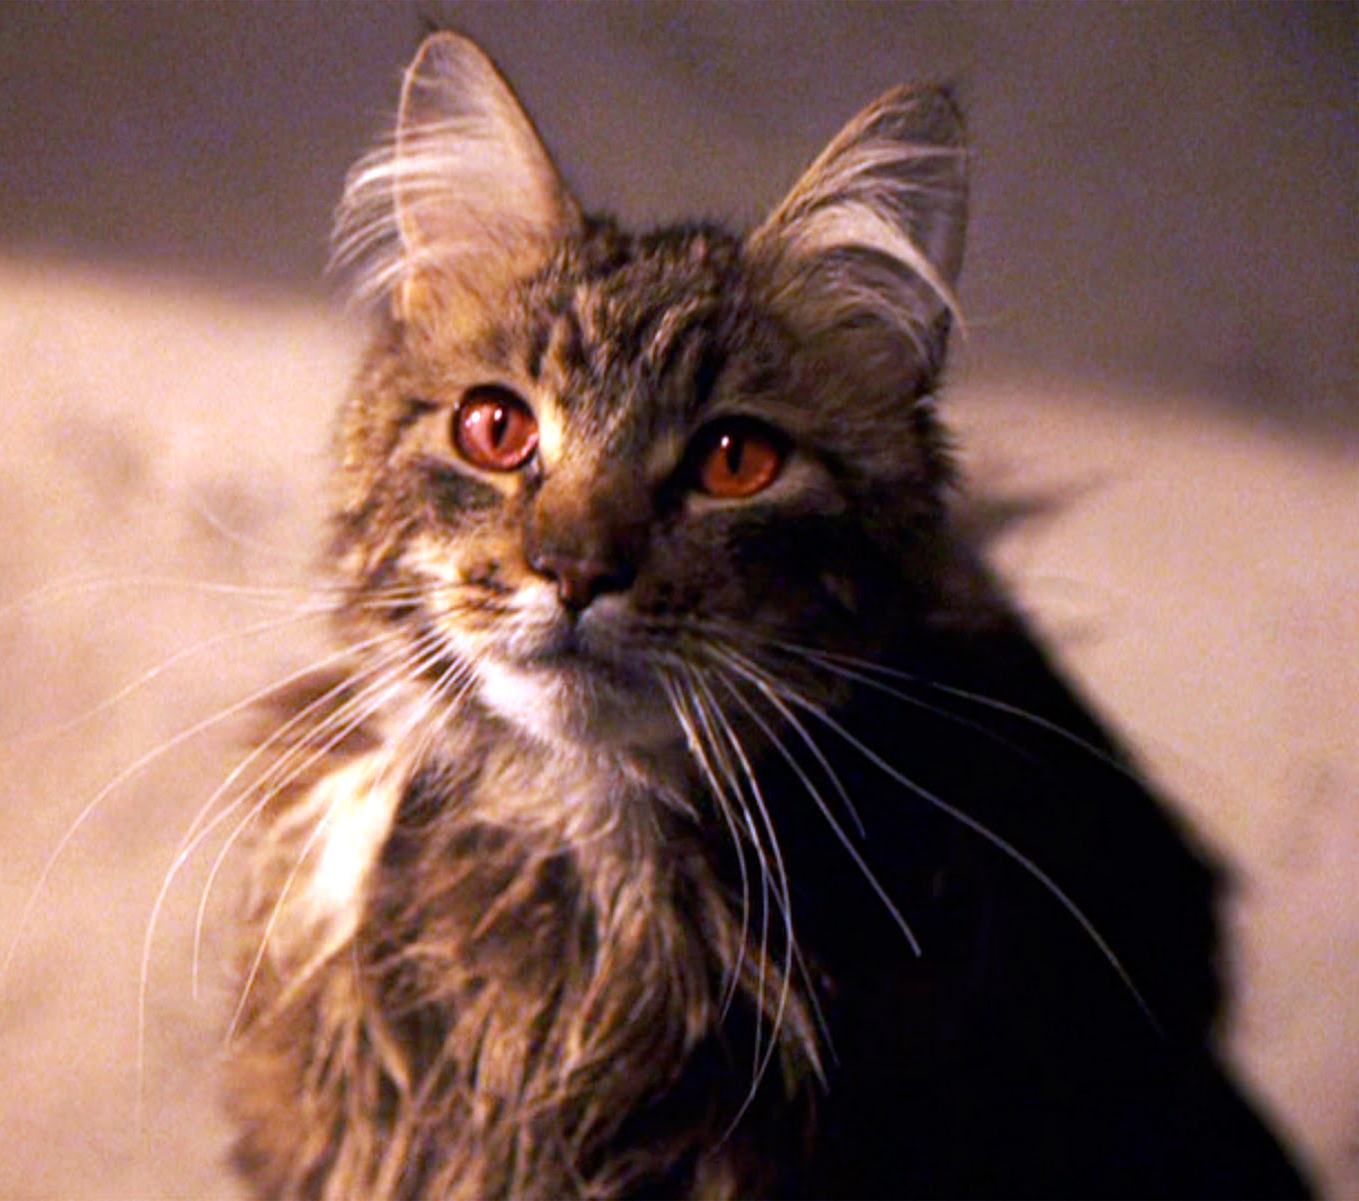 What are the characteristics of Argus Filch's cat? 2